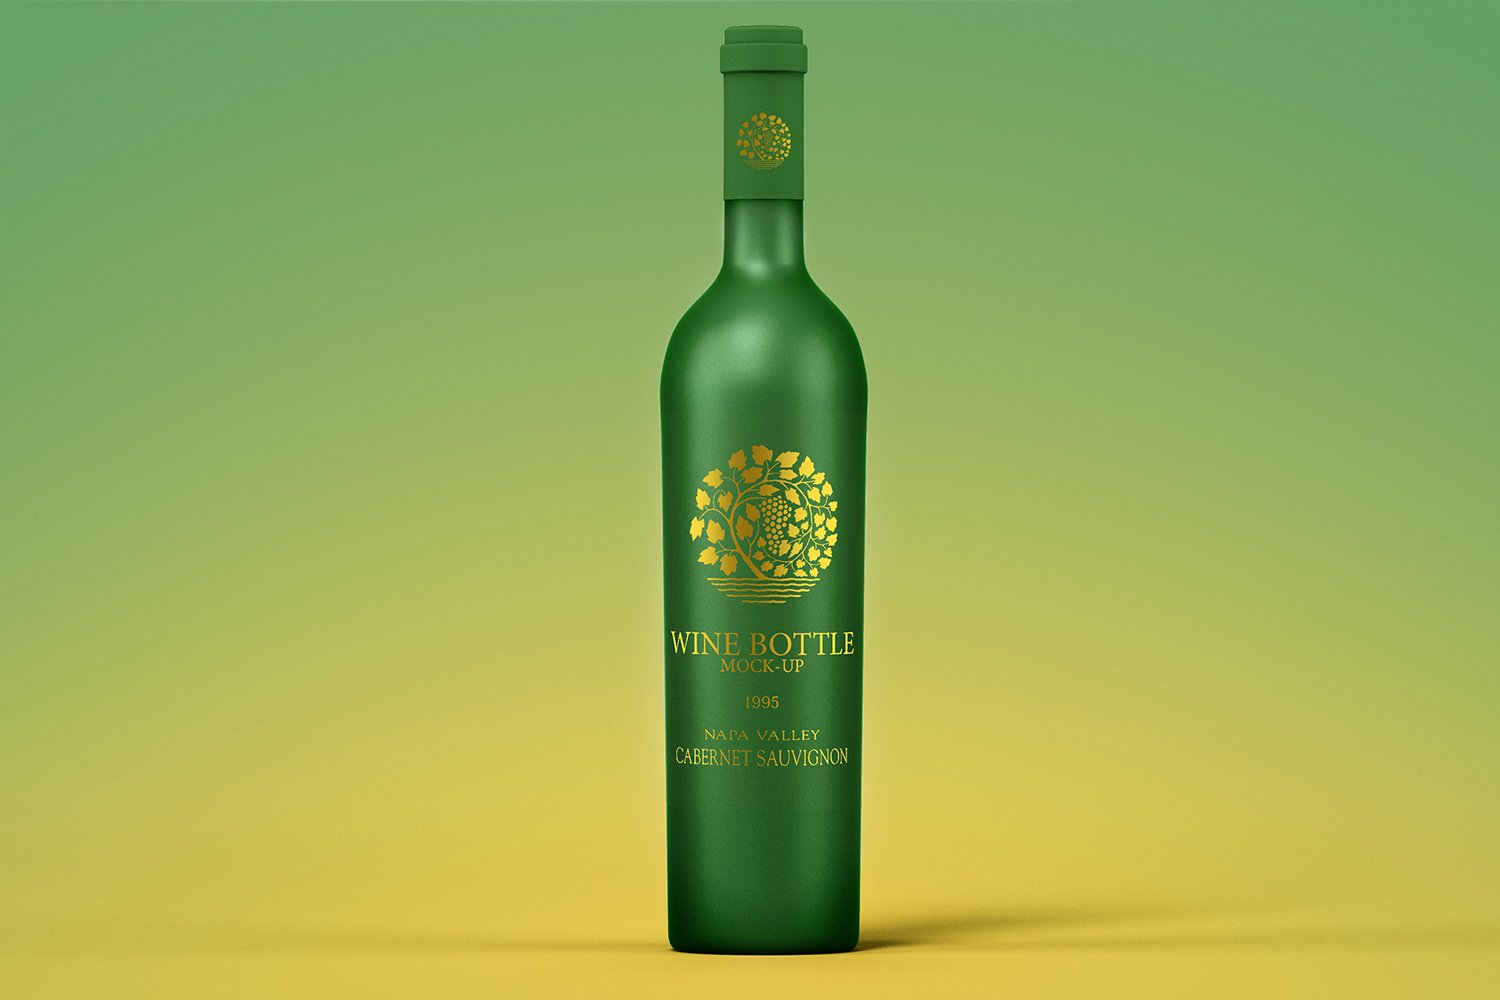 Bright green bottle of wine with gold label.